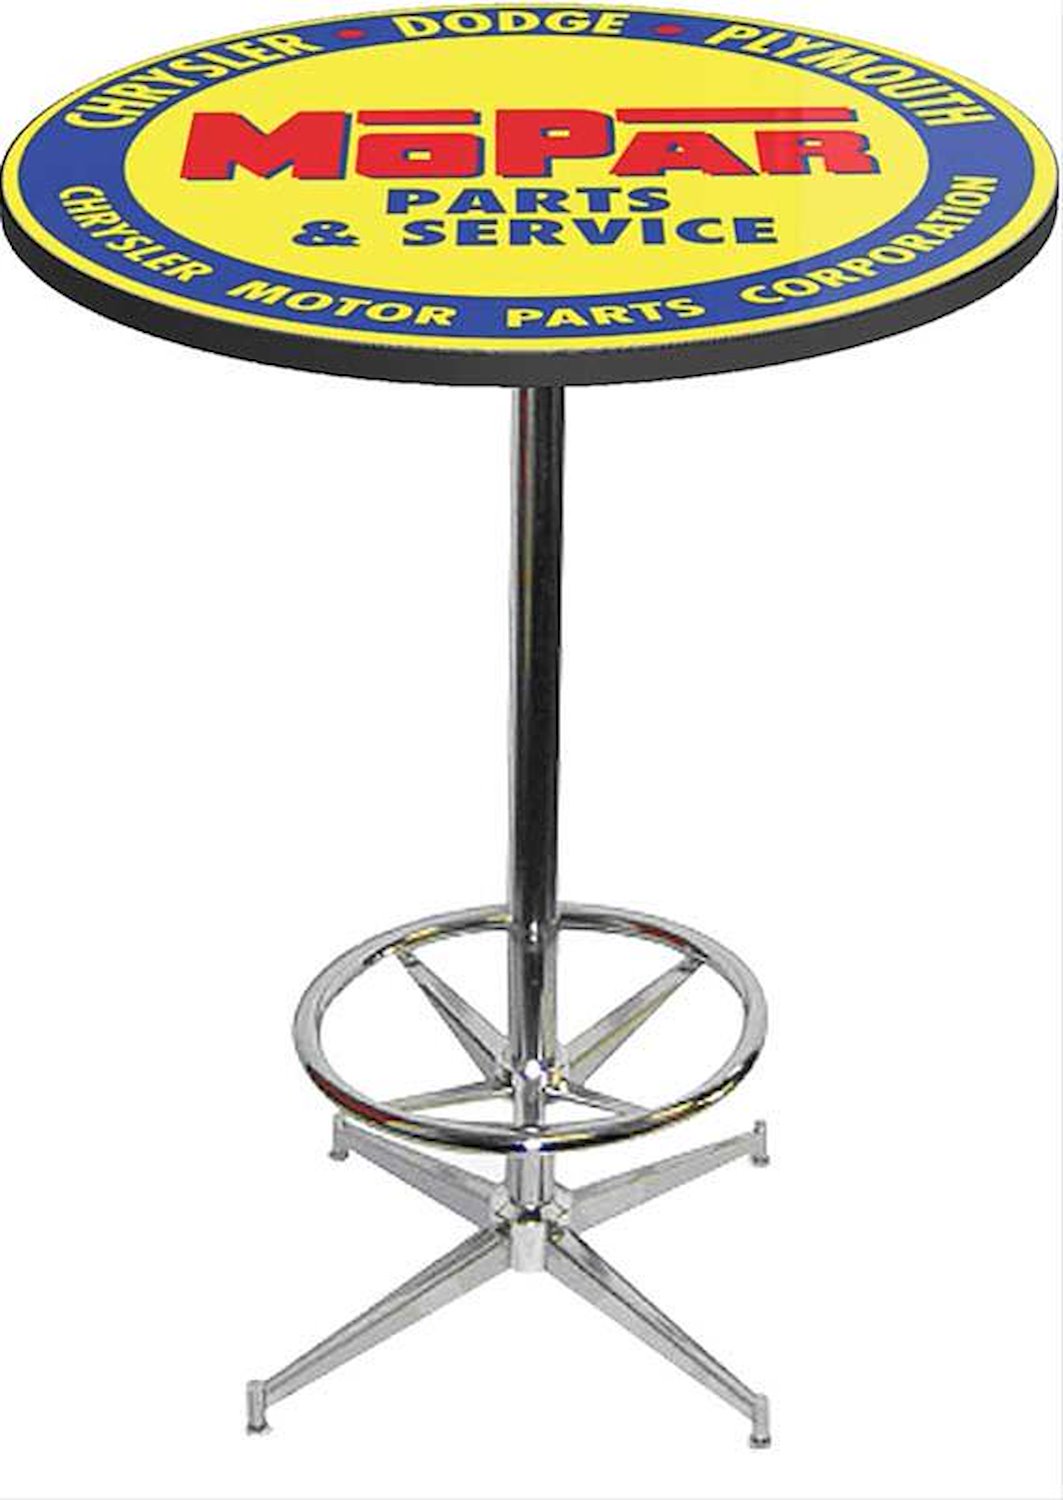 MD673104 Pub Table With Chrome Base And Foot Rest 1948-53 Style Blue/Yellow Mopar parts And Accessories Logo Pub Table With Chro